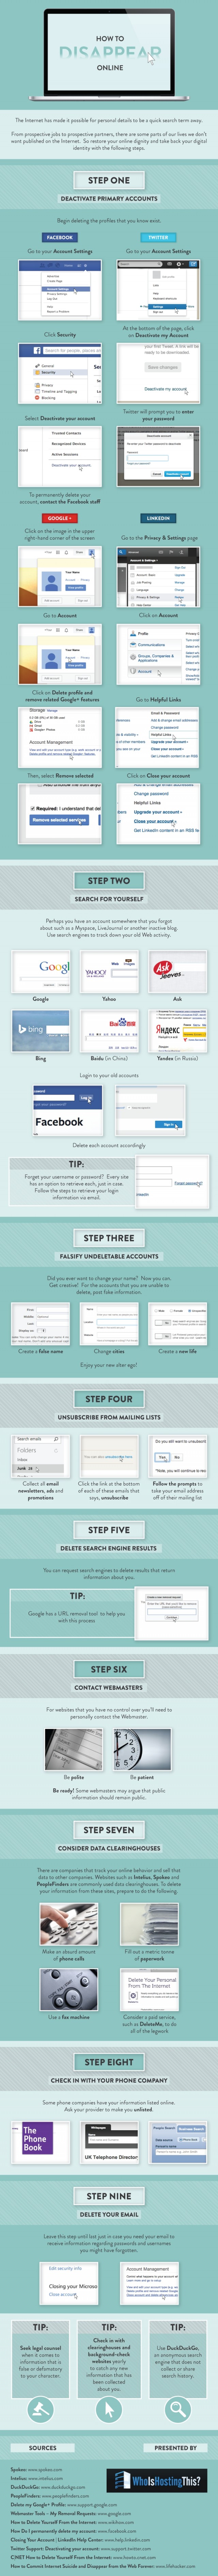 how-to-disappear-online-640x7555